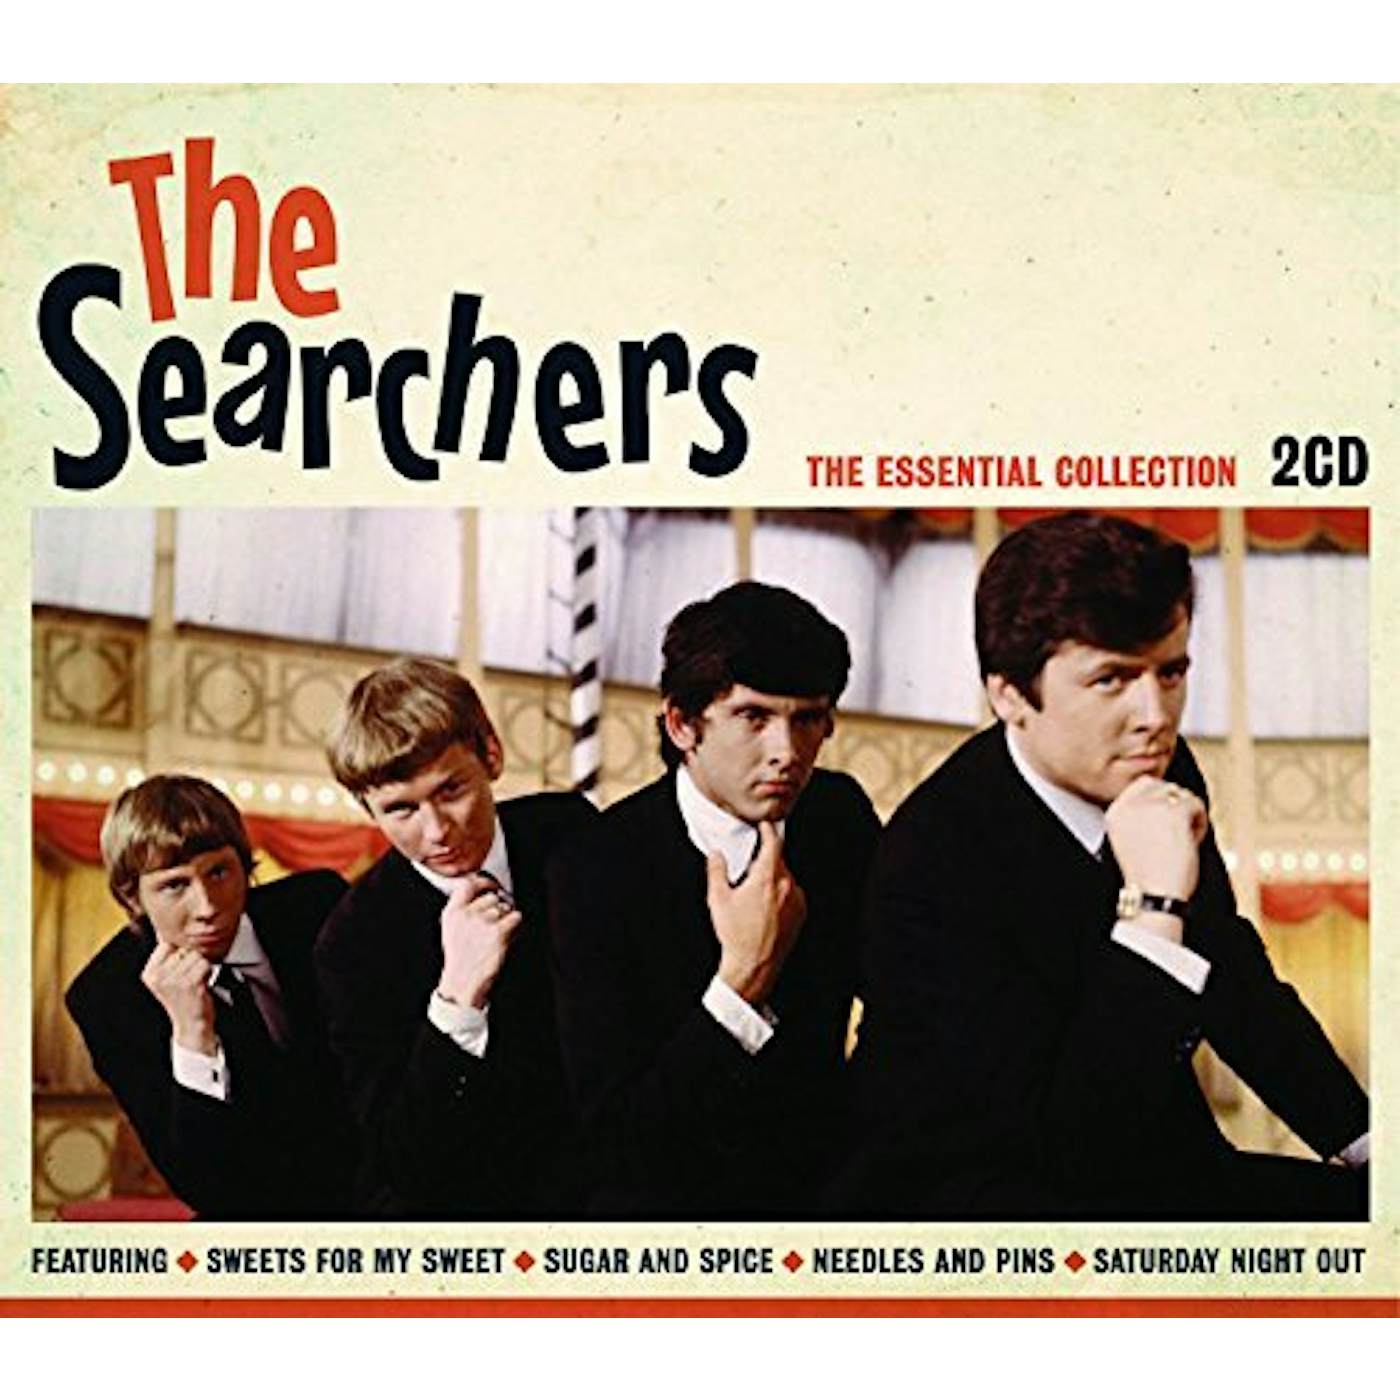 The Searchers ESSENTIAL COLLECTION CD